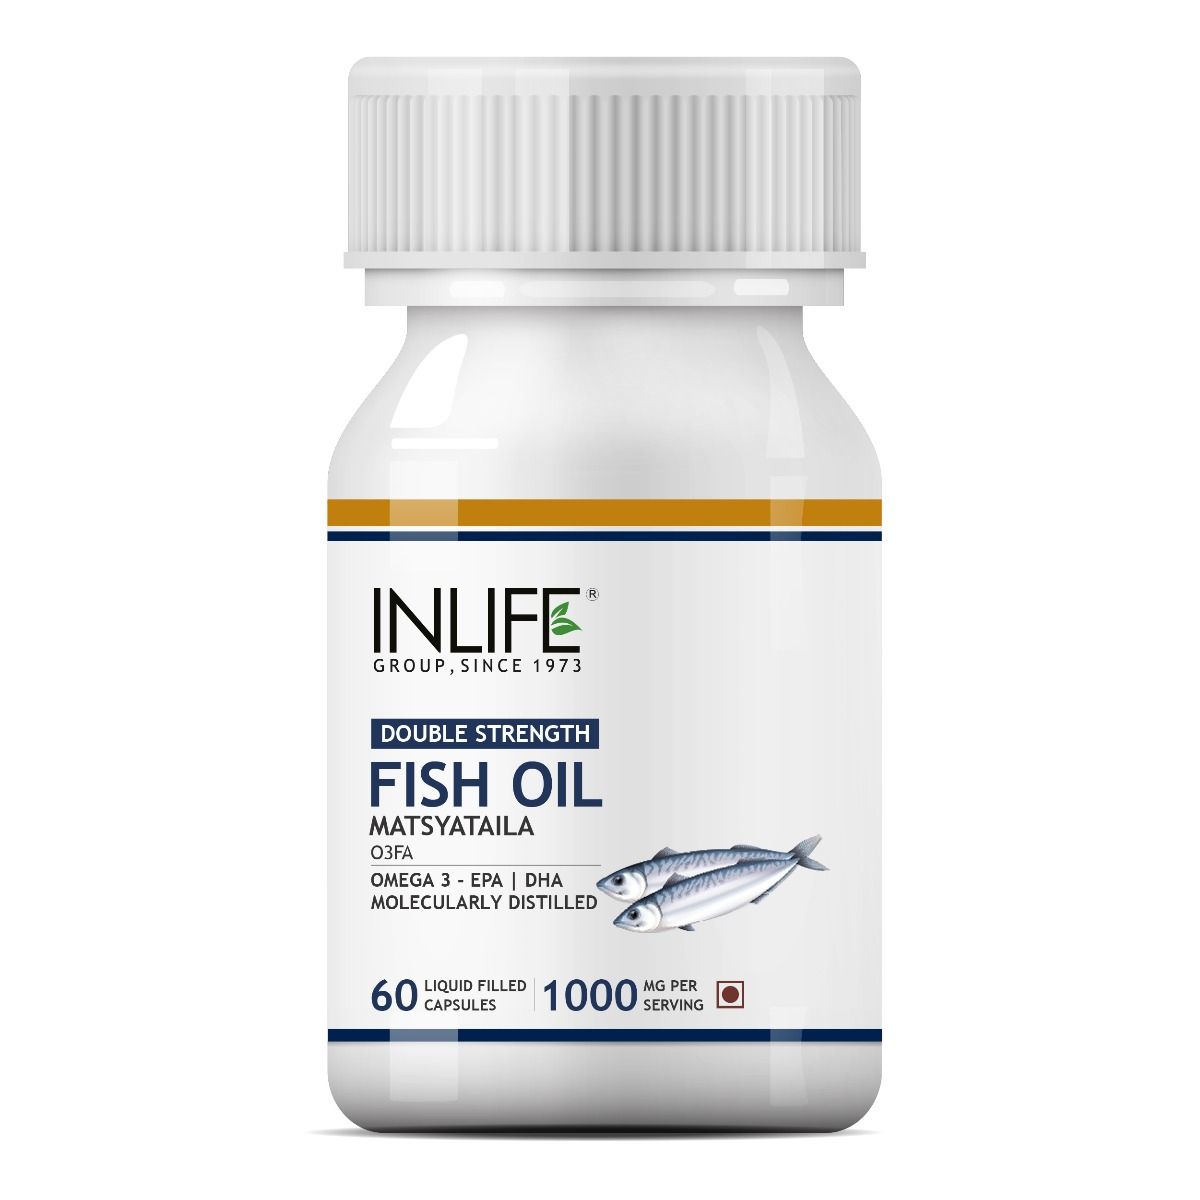 Buy Inlife Double Strength Fish Oil Omega 3 1000 mg, 60 Capsules Online